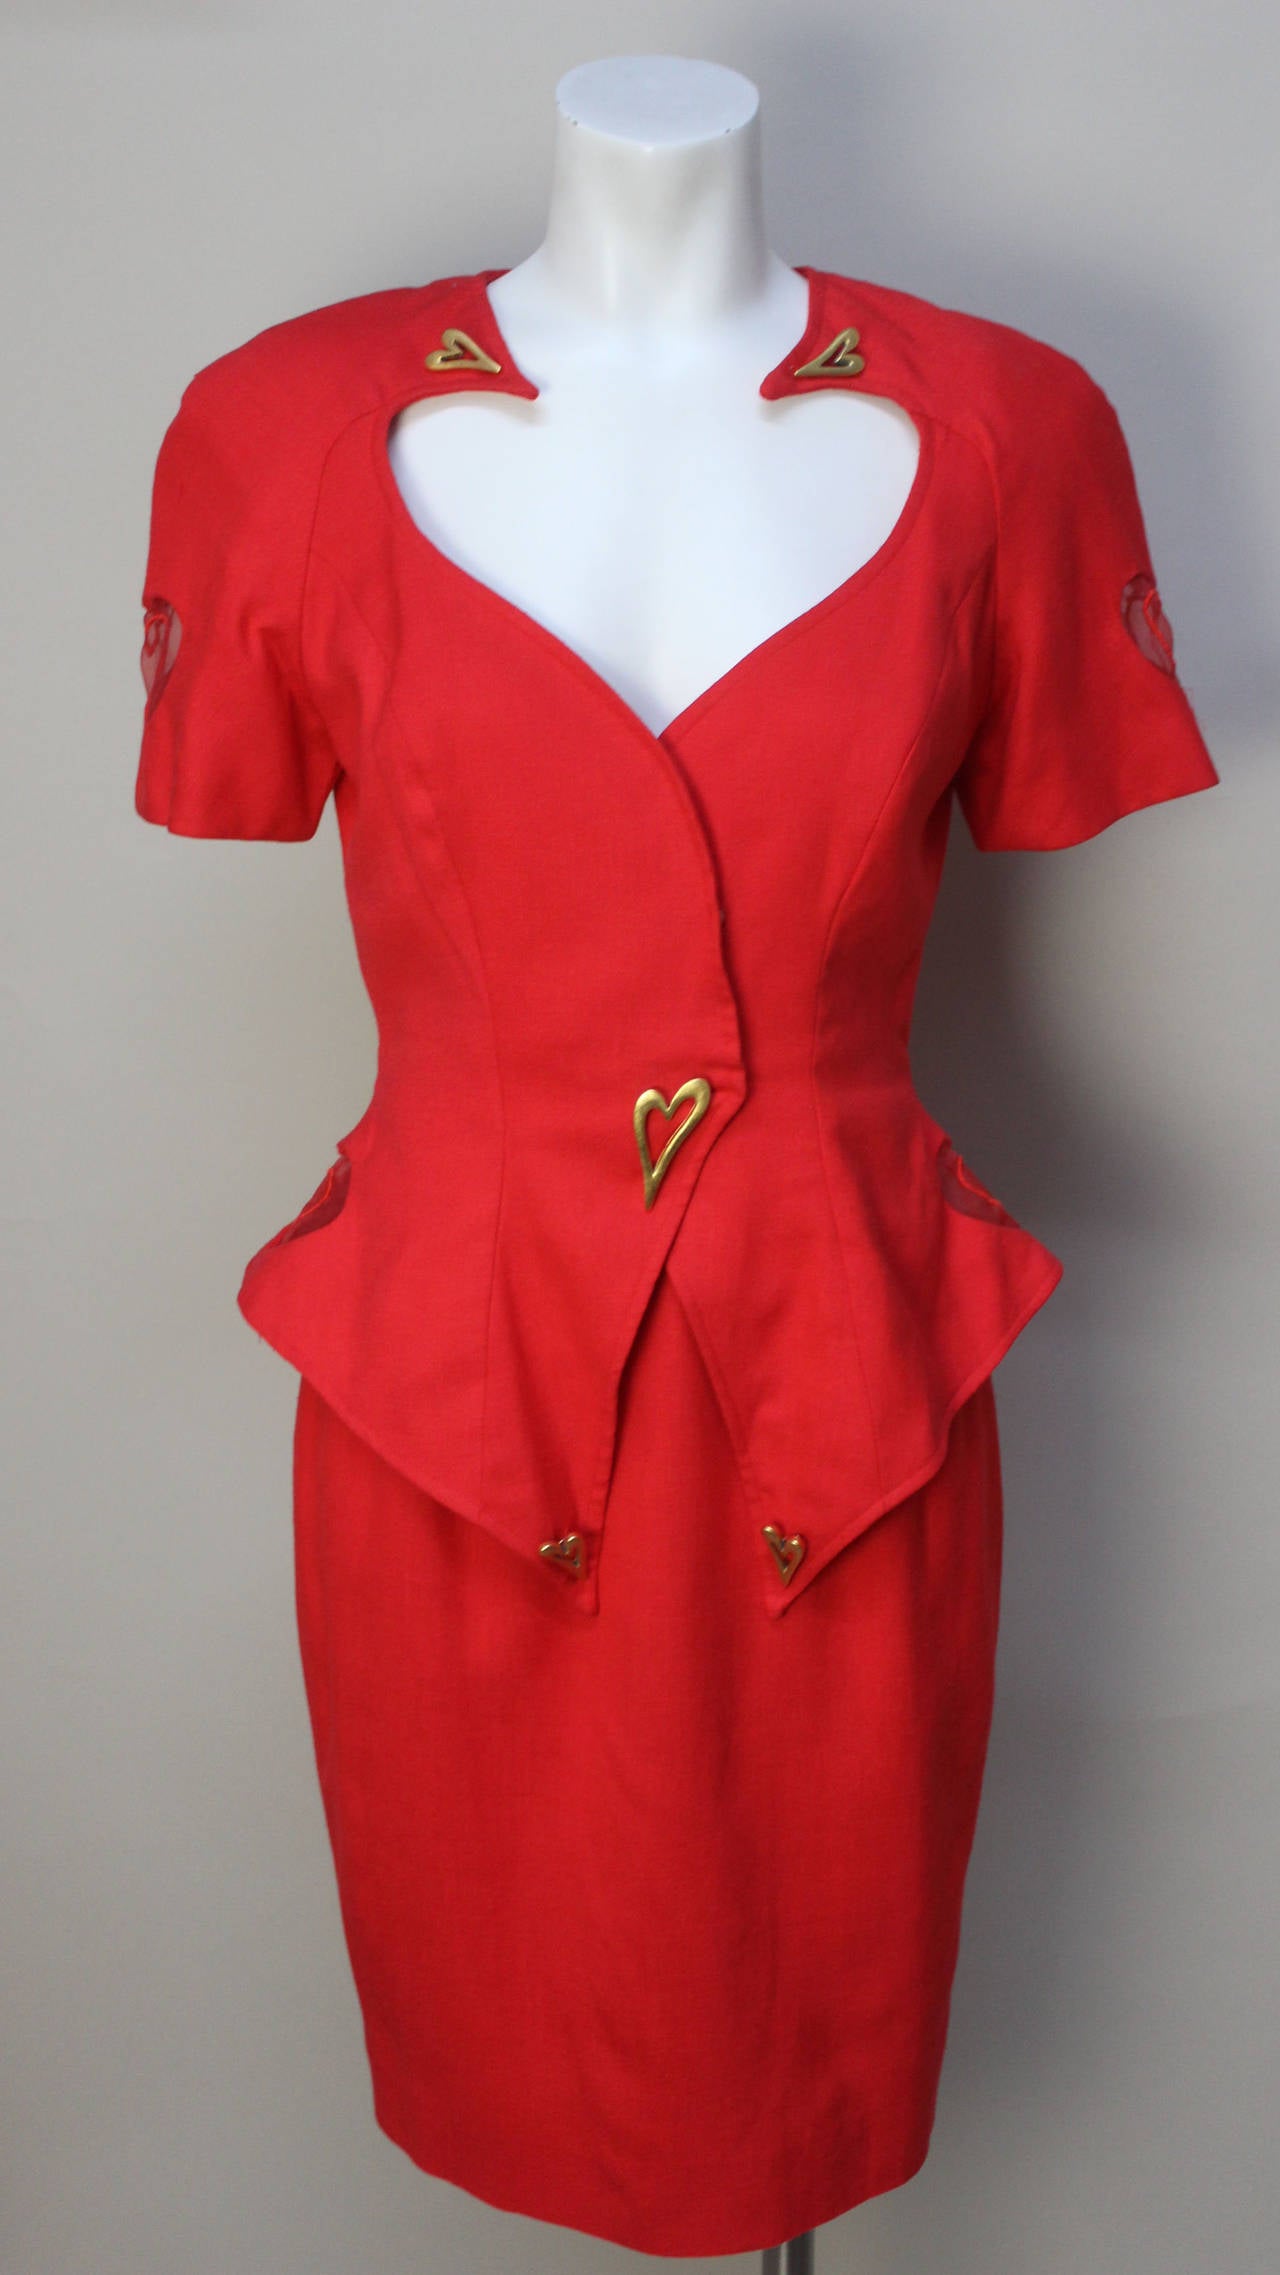 This is one of the more extravegant ensembles that Julie Duroche designed for After Five. It has classic 1980's silhouette with a pencil skirt and a matching short sleeve peplum jacket. The details however, are anything but classic. It has a large